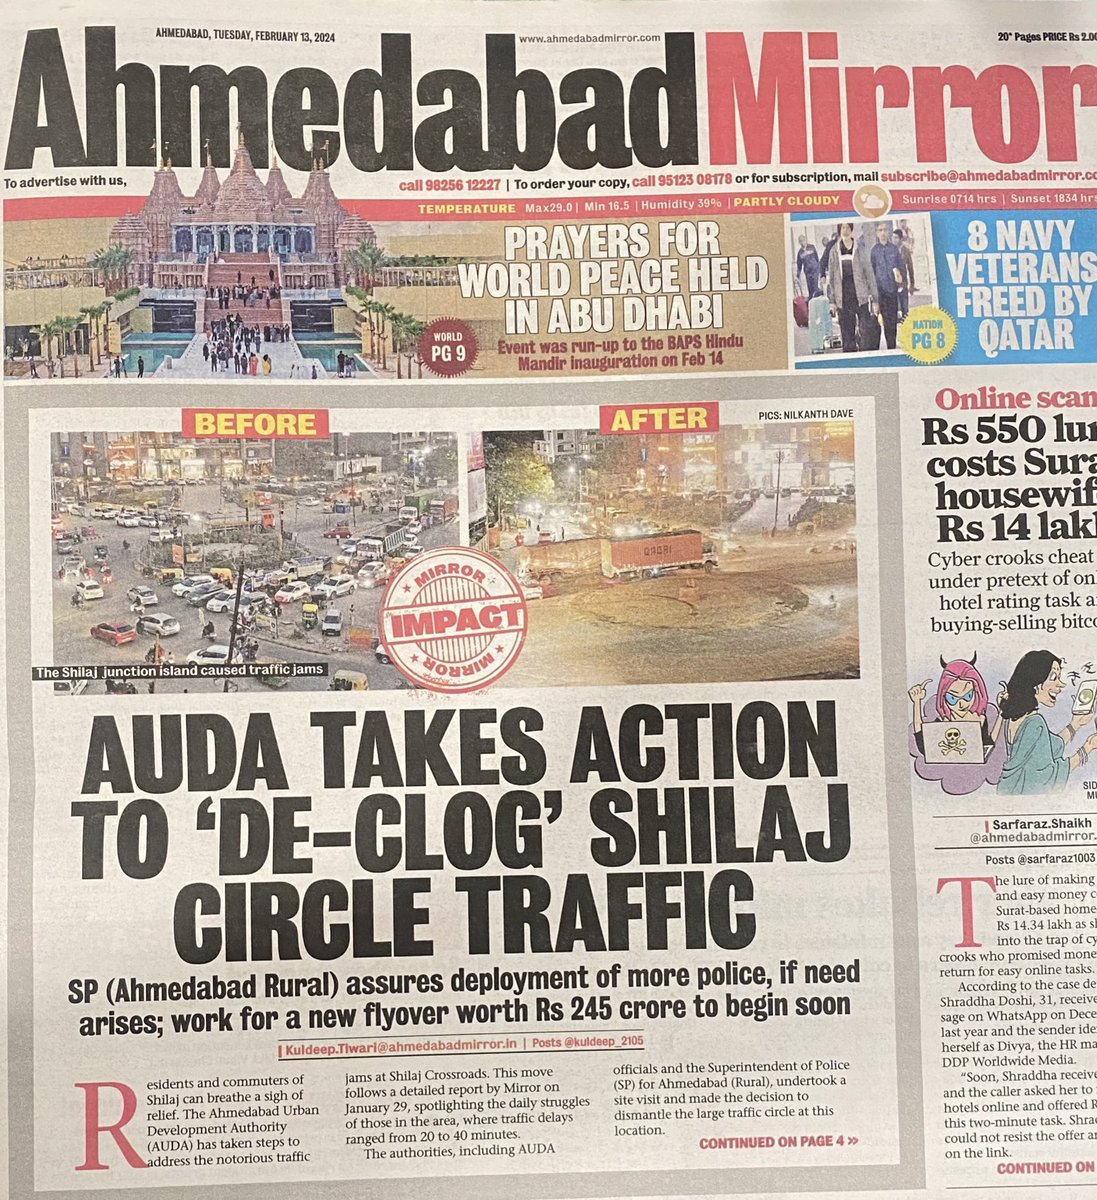 An outskirt of Ahmedabad, with 50% land not developed, is facing traffic snarls!

And a new ‘flyover’ worth ₹245 crore will supposedly address the issue! 

#MYBYK #MakingCitiesLiveableAgain #MovePeopleNotCars #ParkTheCar #SustainableMobility #PublicTransport #MicroMobility